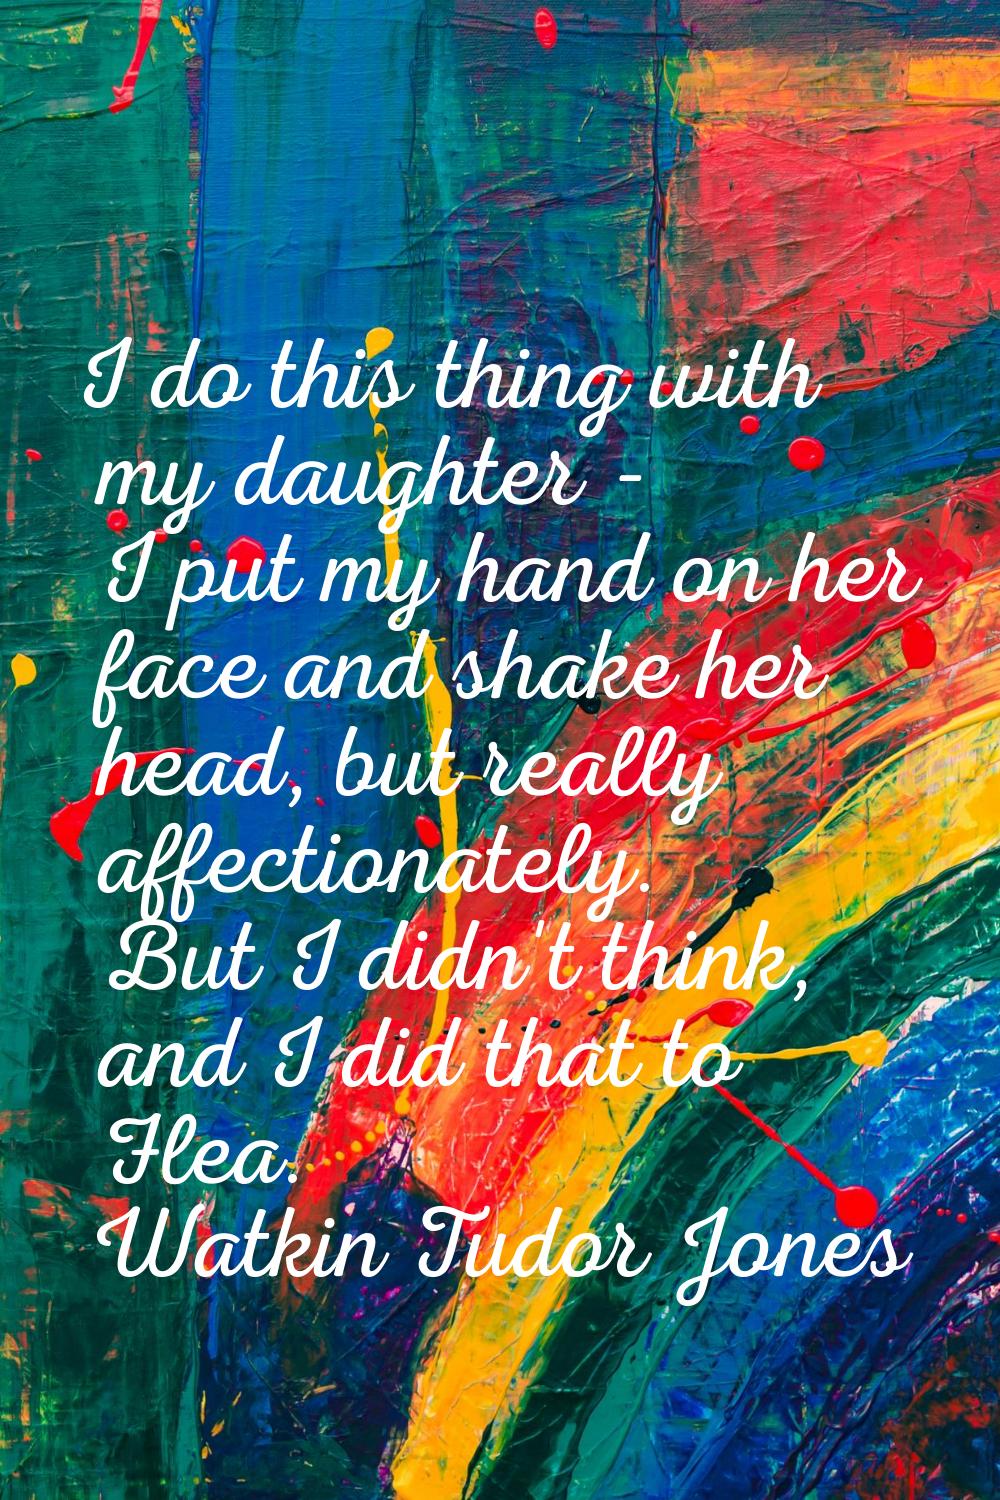 I do this thing with my daughter - I put my hand on her face and shake her head, but really affecti